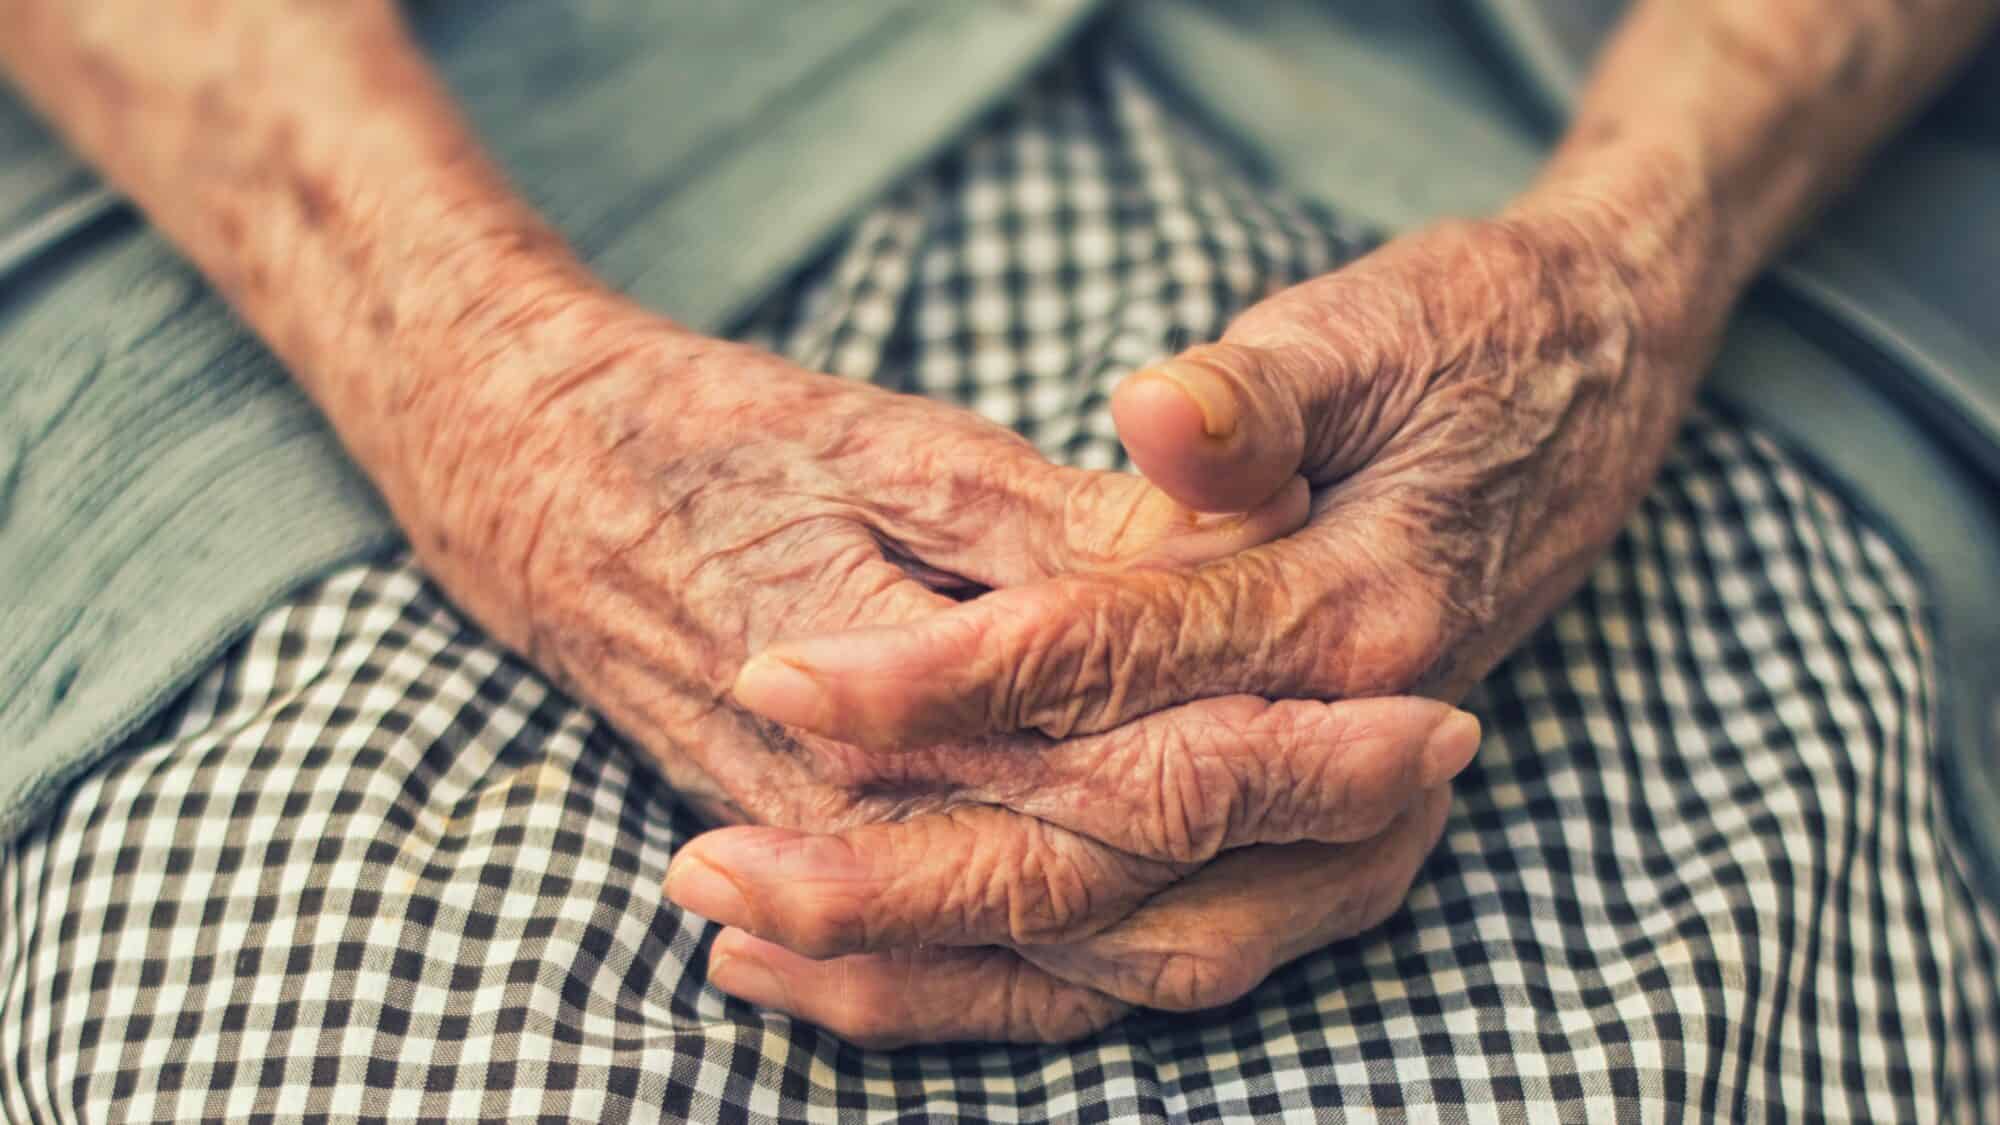 A pair of hands of an elderly person folded on their lap.